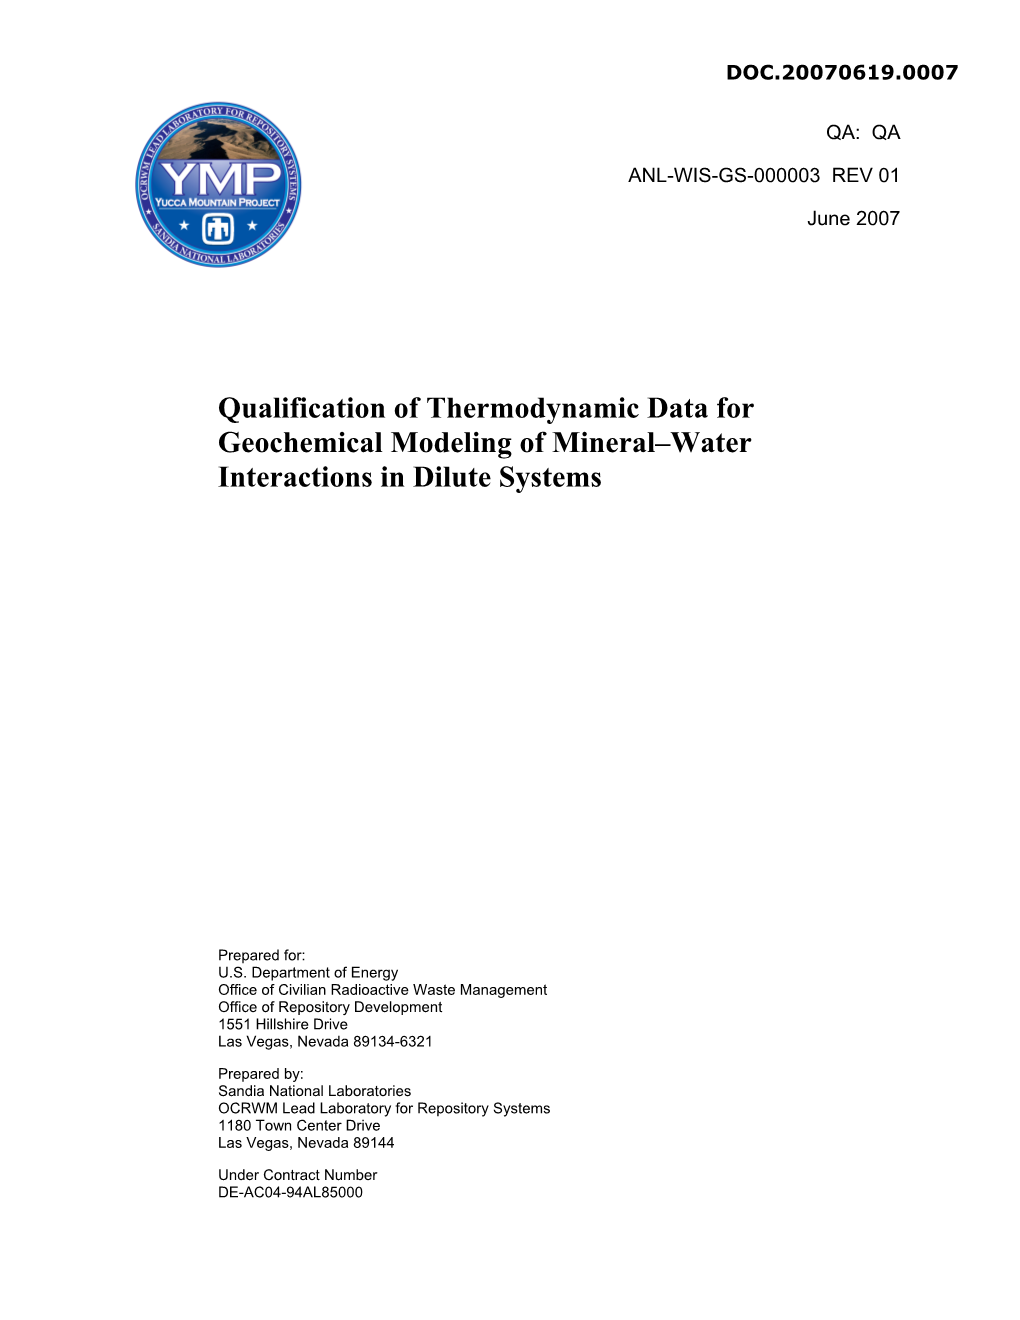 Qualification of Thermodynamic Data for Geochemical Modeling of Mineral-Water Interactions in D